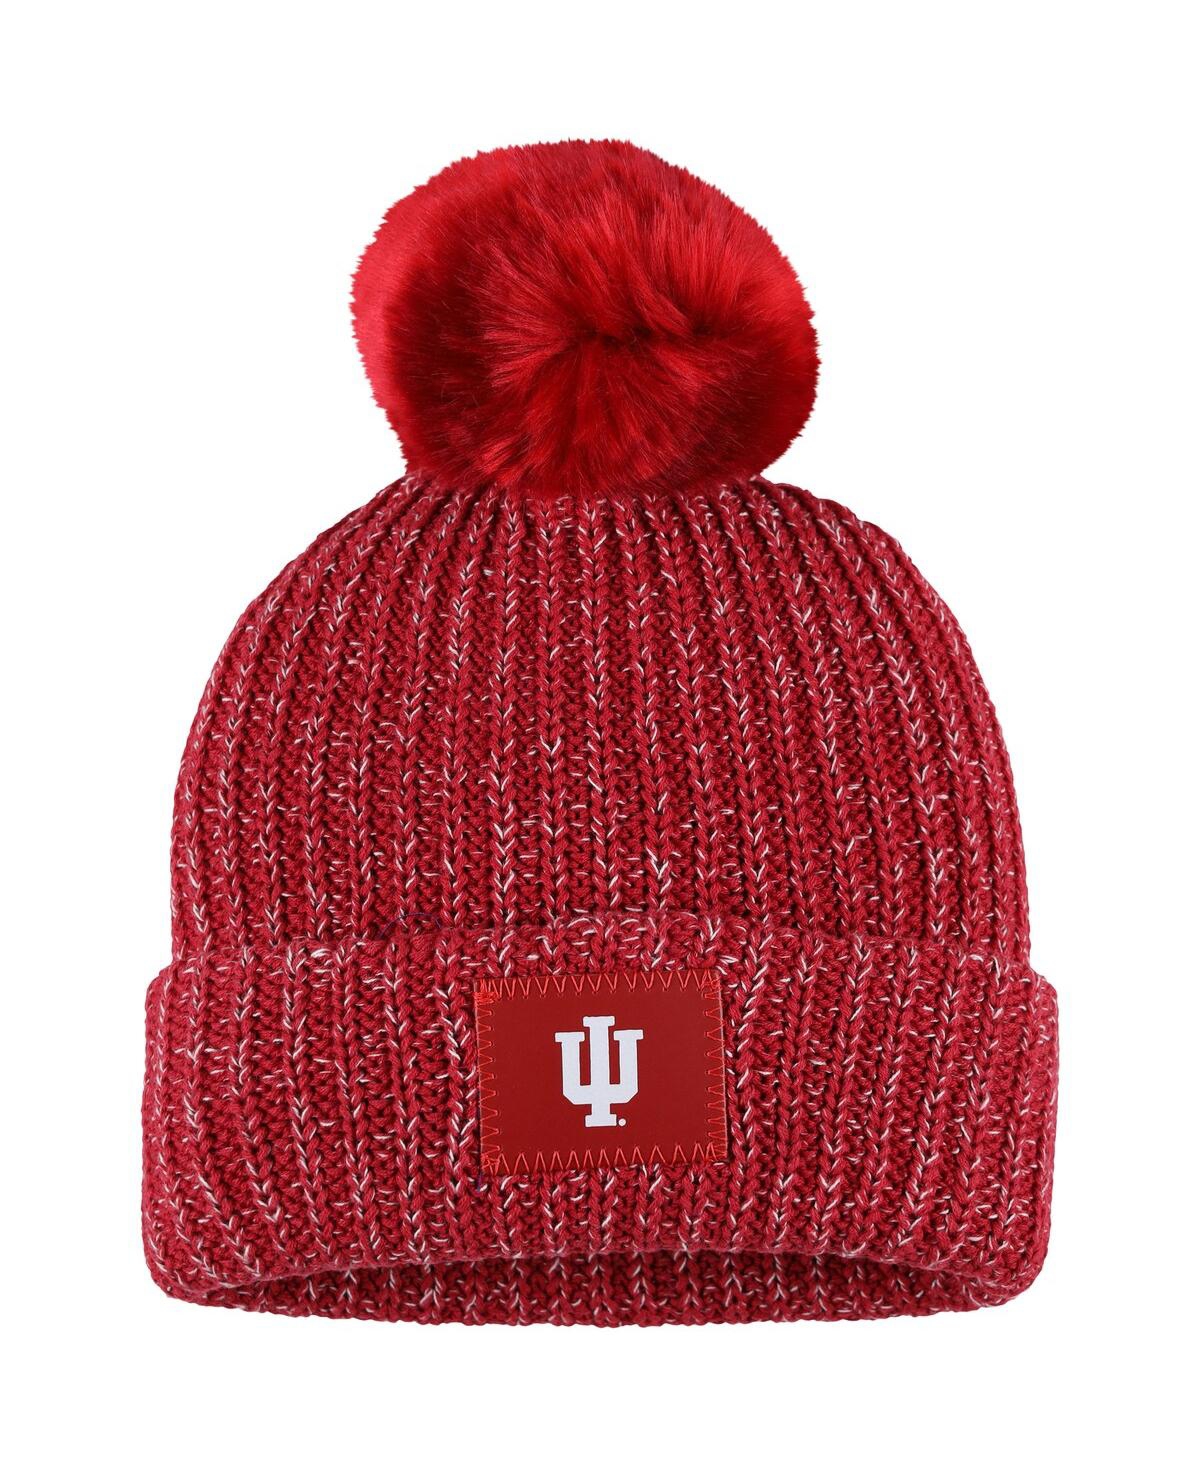 Women's Love Your Melon Crimson Indiana Hoosiers Cuffed Knit Hat with Pom - Crimson